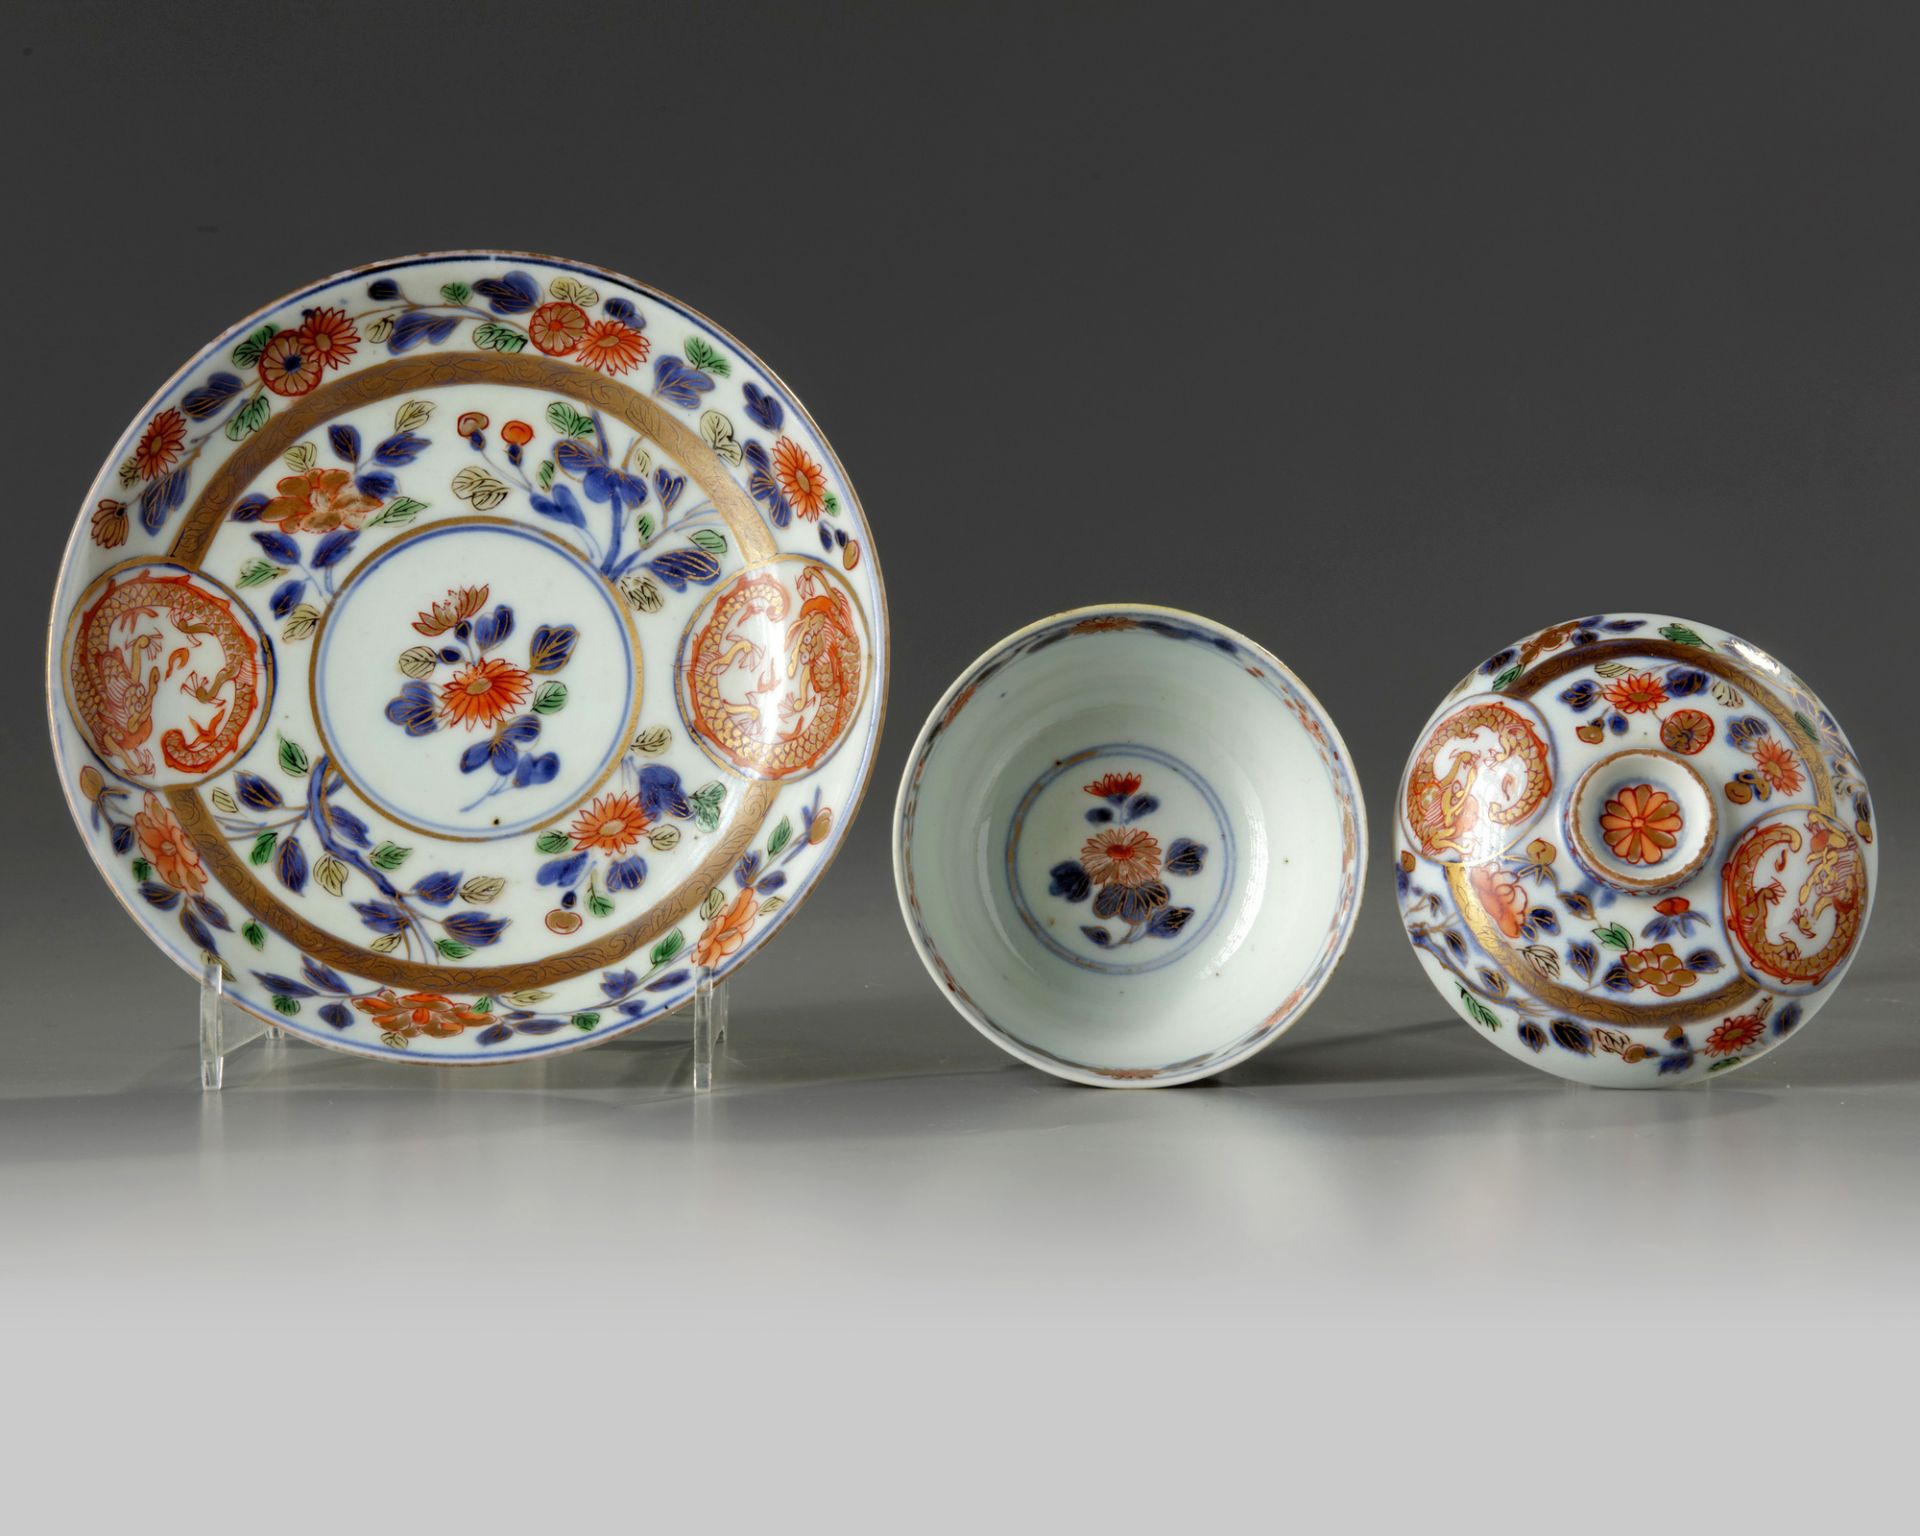 A JAPANESE IMARI TEACUP WITH COVER AND SAUCER, 17TH CENTURY - Image 3 of 6